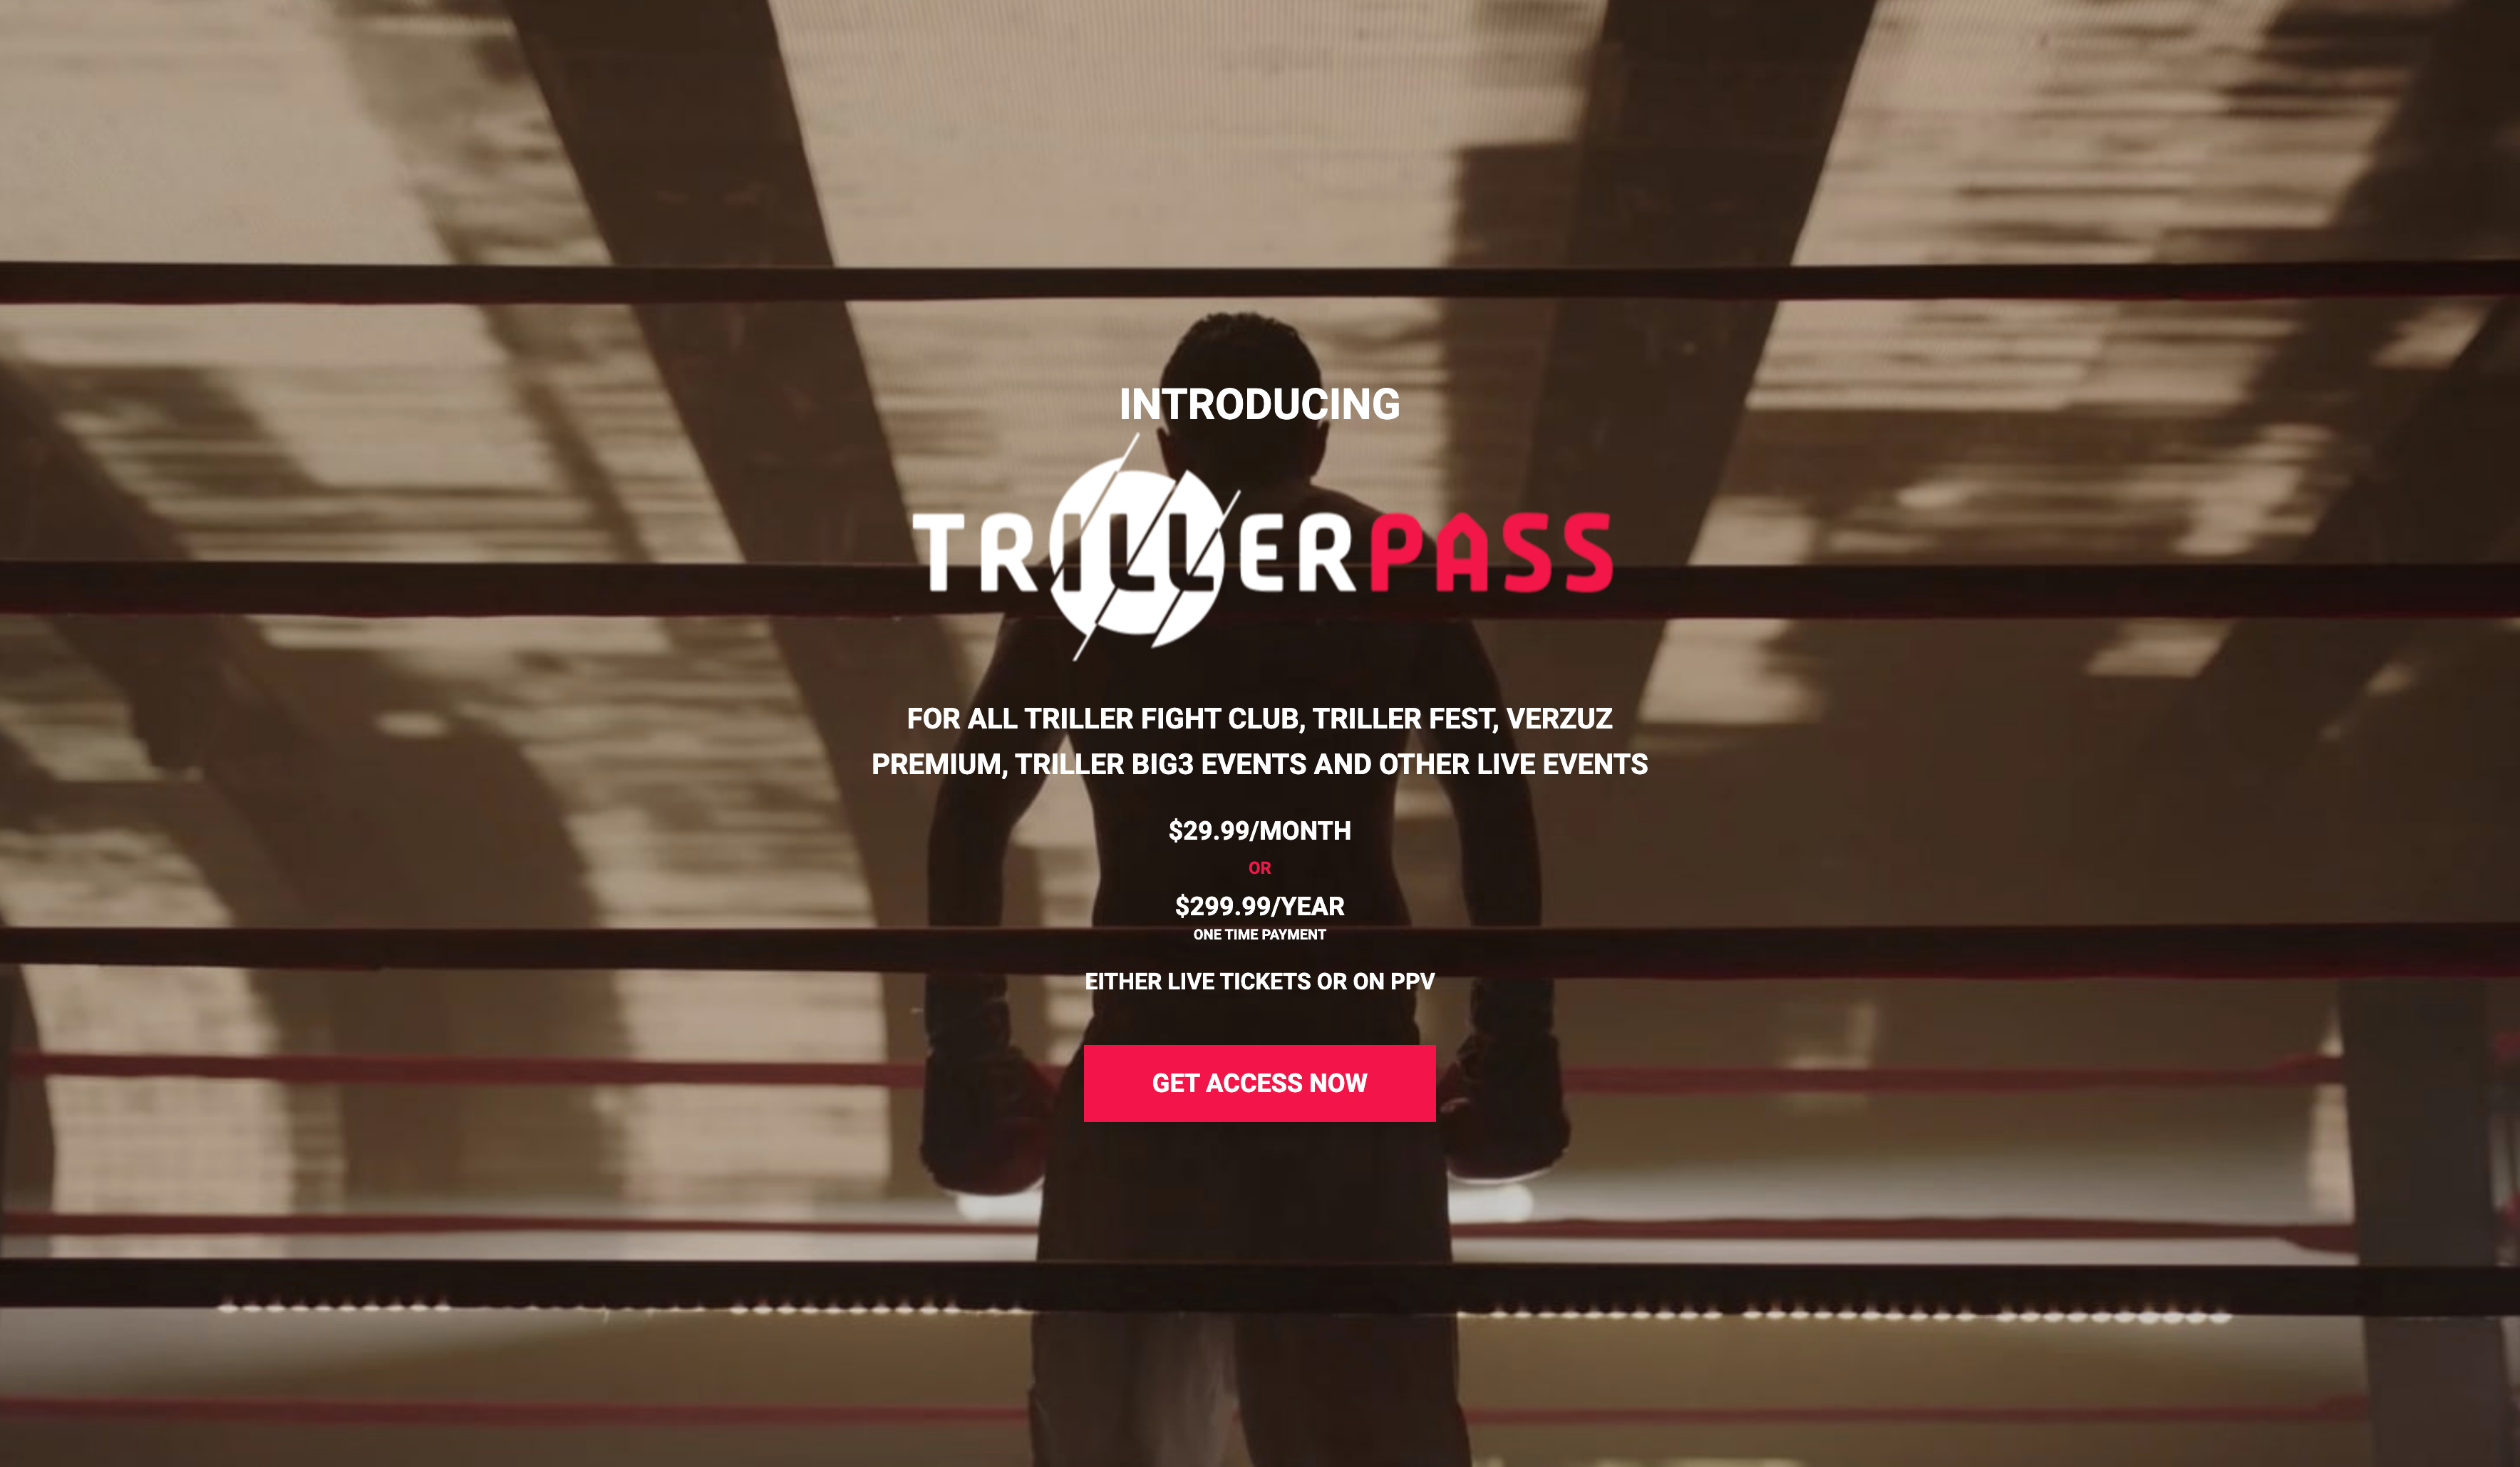 TrillerPass gives subscribers access to unlimited premium Triller boxing and music PPV events